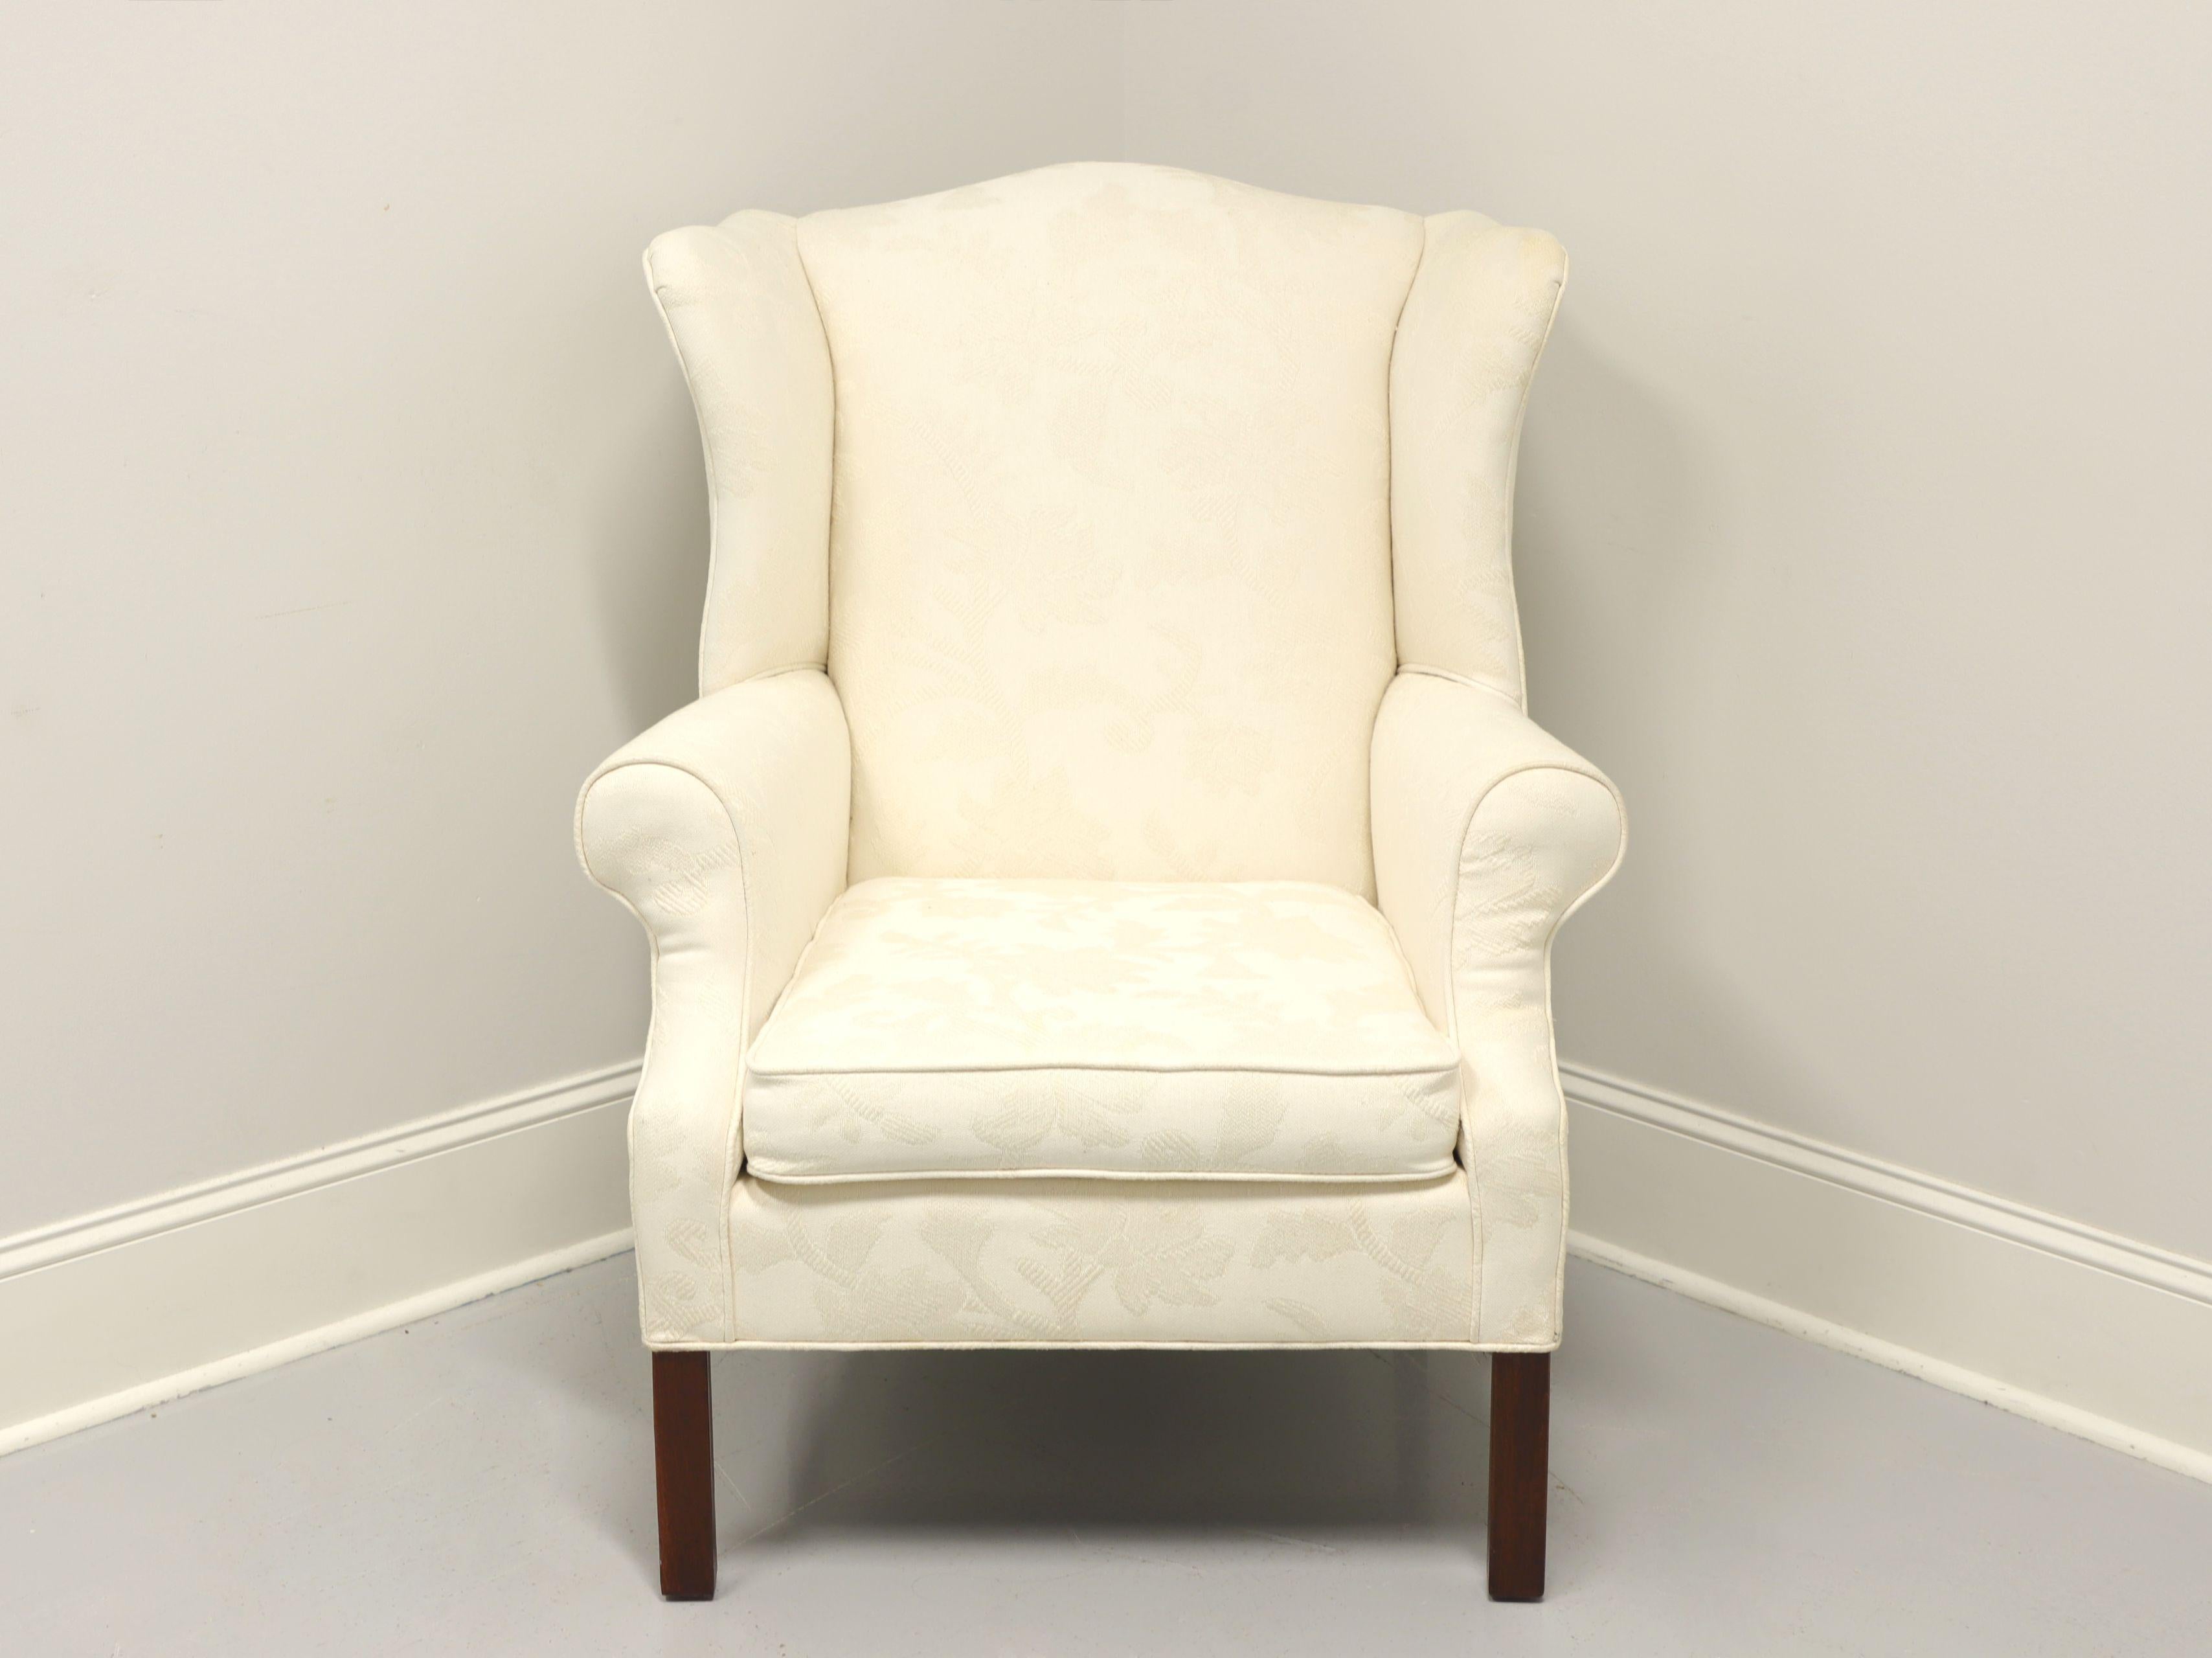 A Chippendale style wing back chair, unbranded, similar quality to Drexel or Hickory chair. Neutral cream colored raised pattern fabric upholstery on a mahogany frame with straight legs. Made in the USA, in the late 20th Century.

Measures: overall: